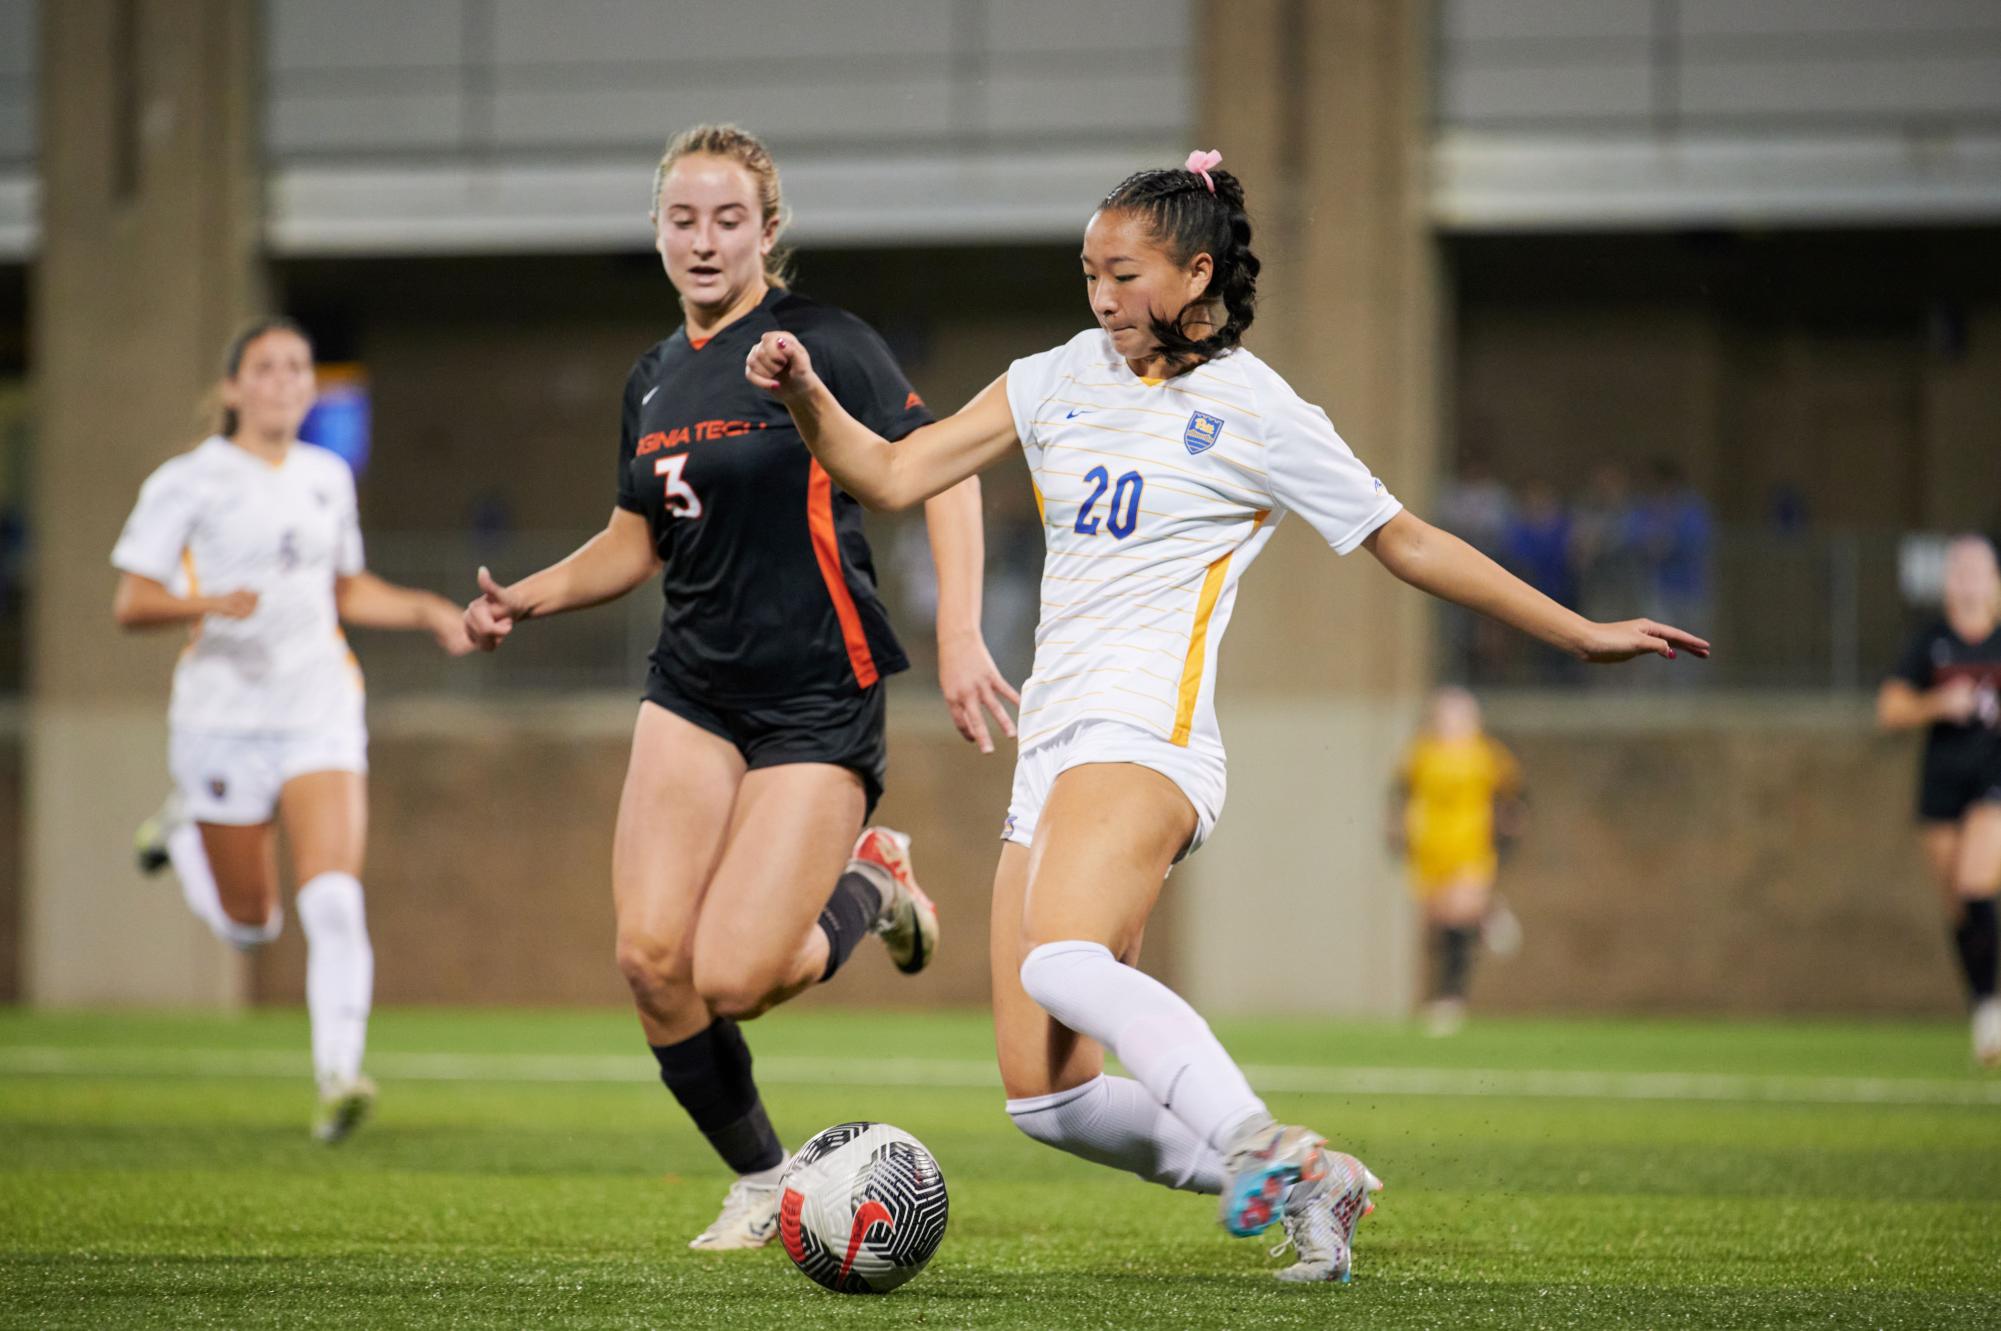 First-year defender Olivia Lee (20) defends the ball during the game against Virginia Tech at the Ambrose Urbanic Field on Thursday night.